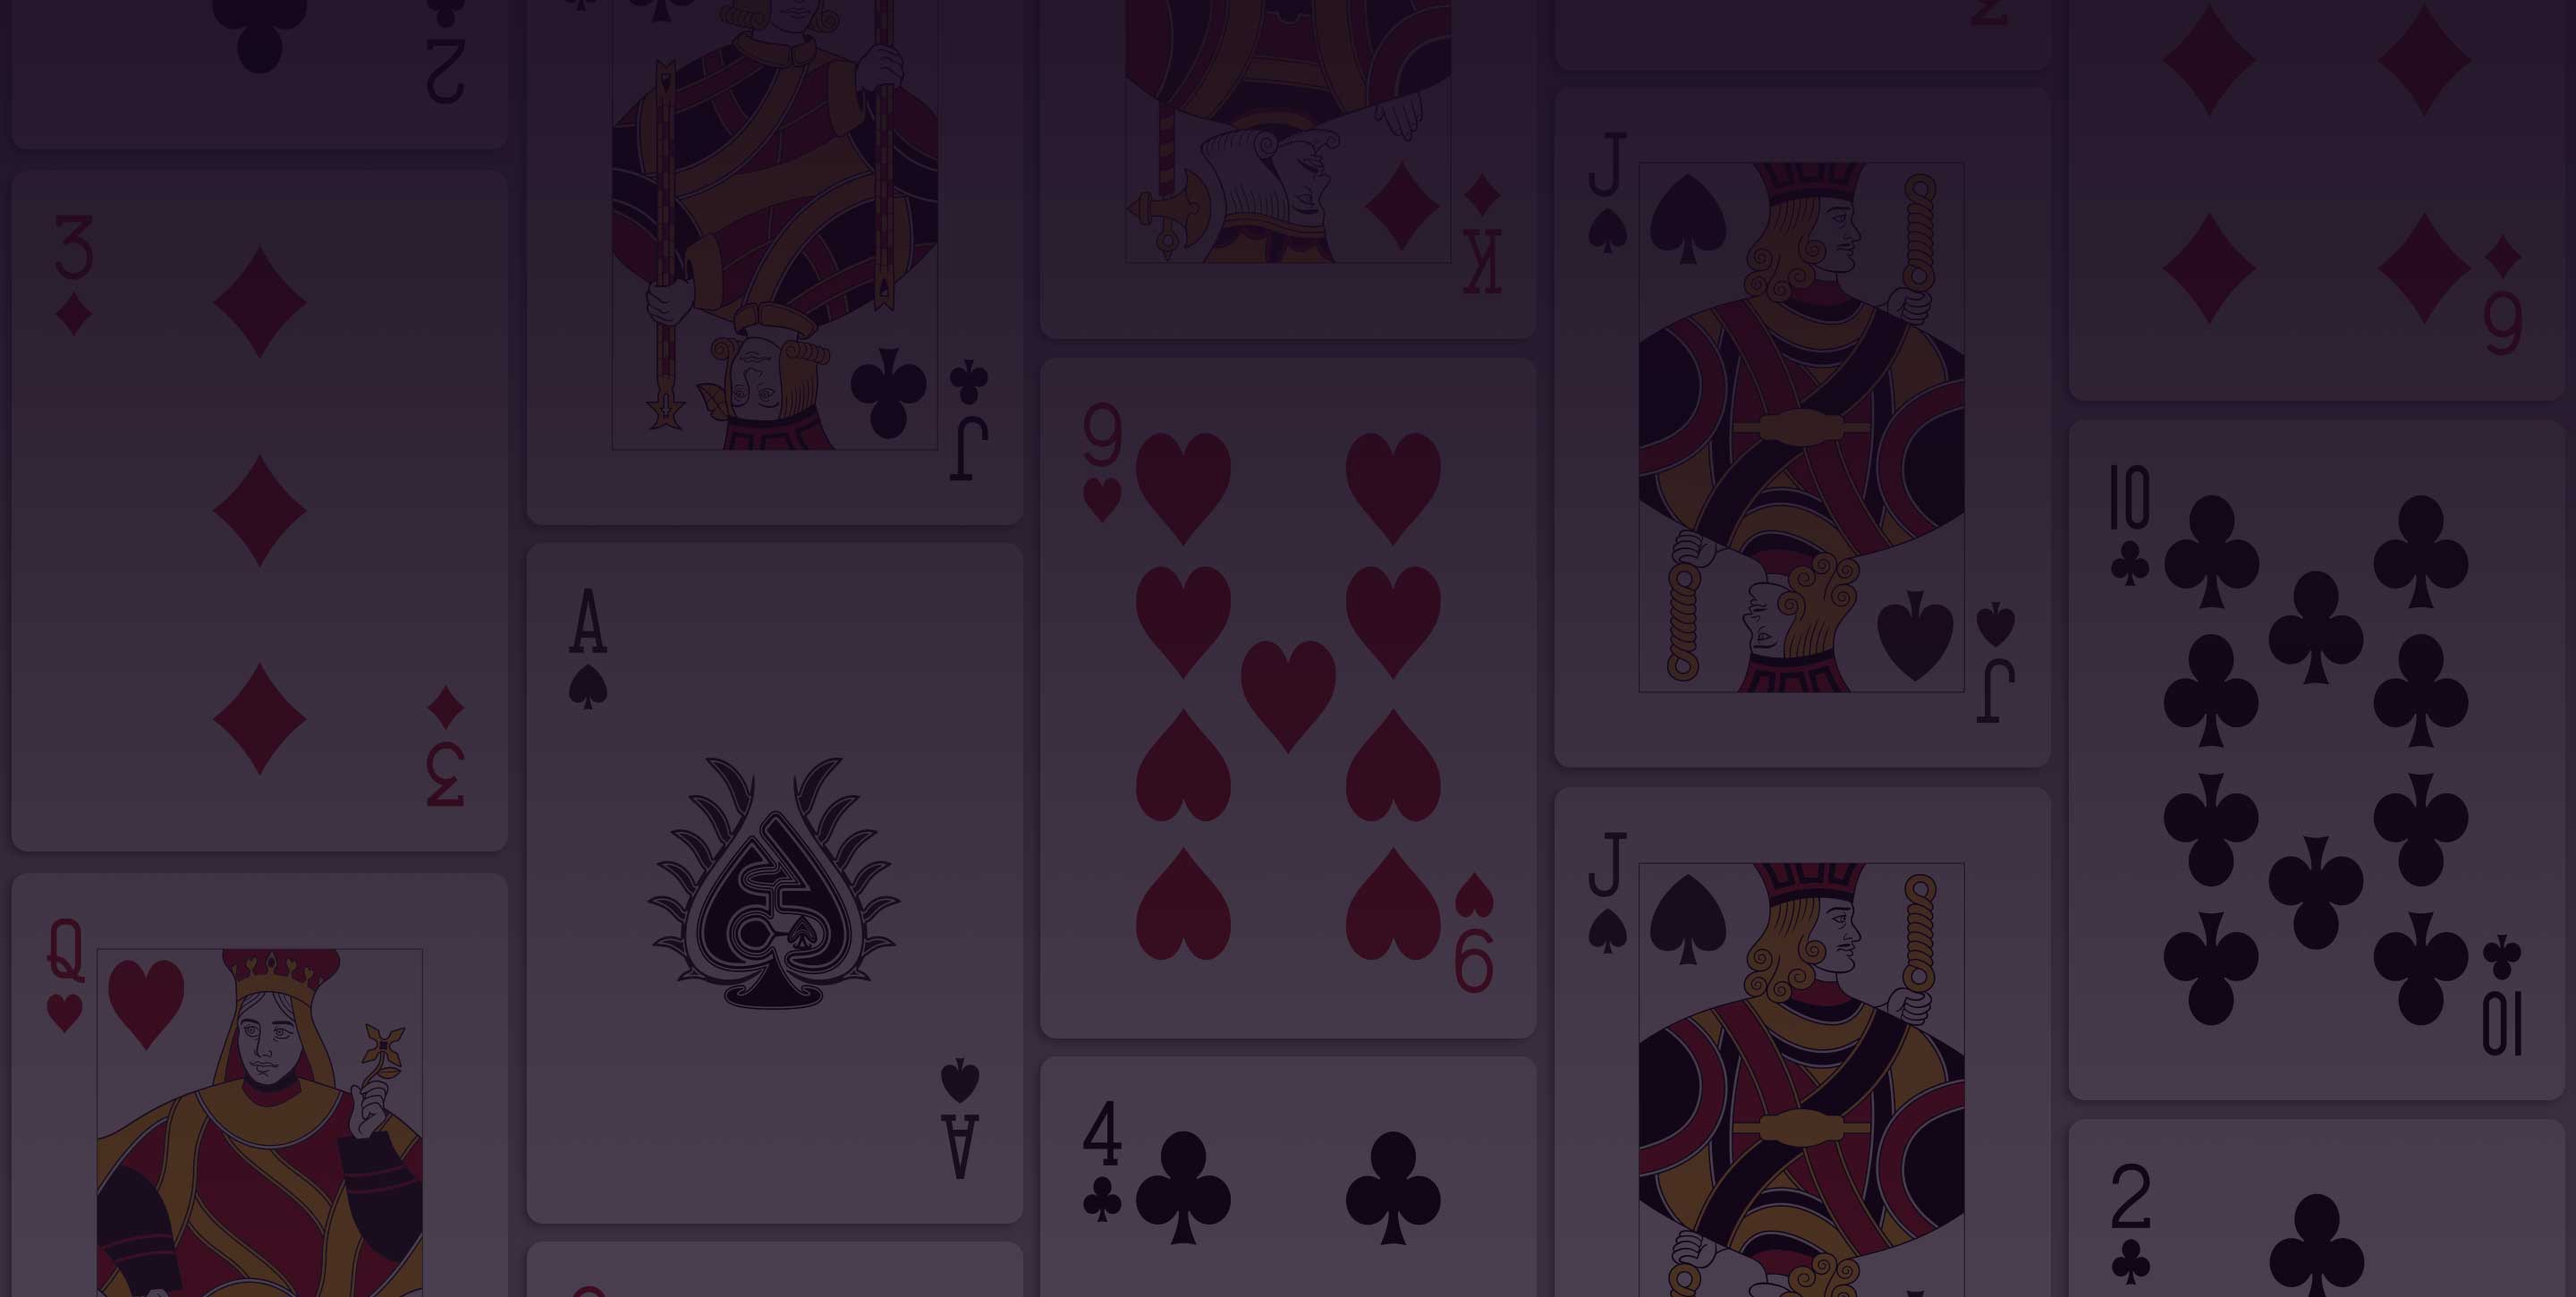 Create your own Playing Cards with these Free Templates (PDF, PSD, AI, JPG,  PNG)